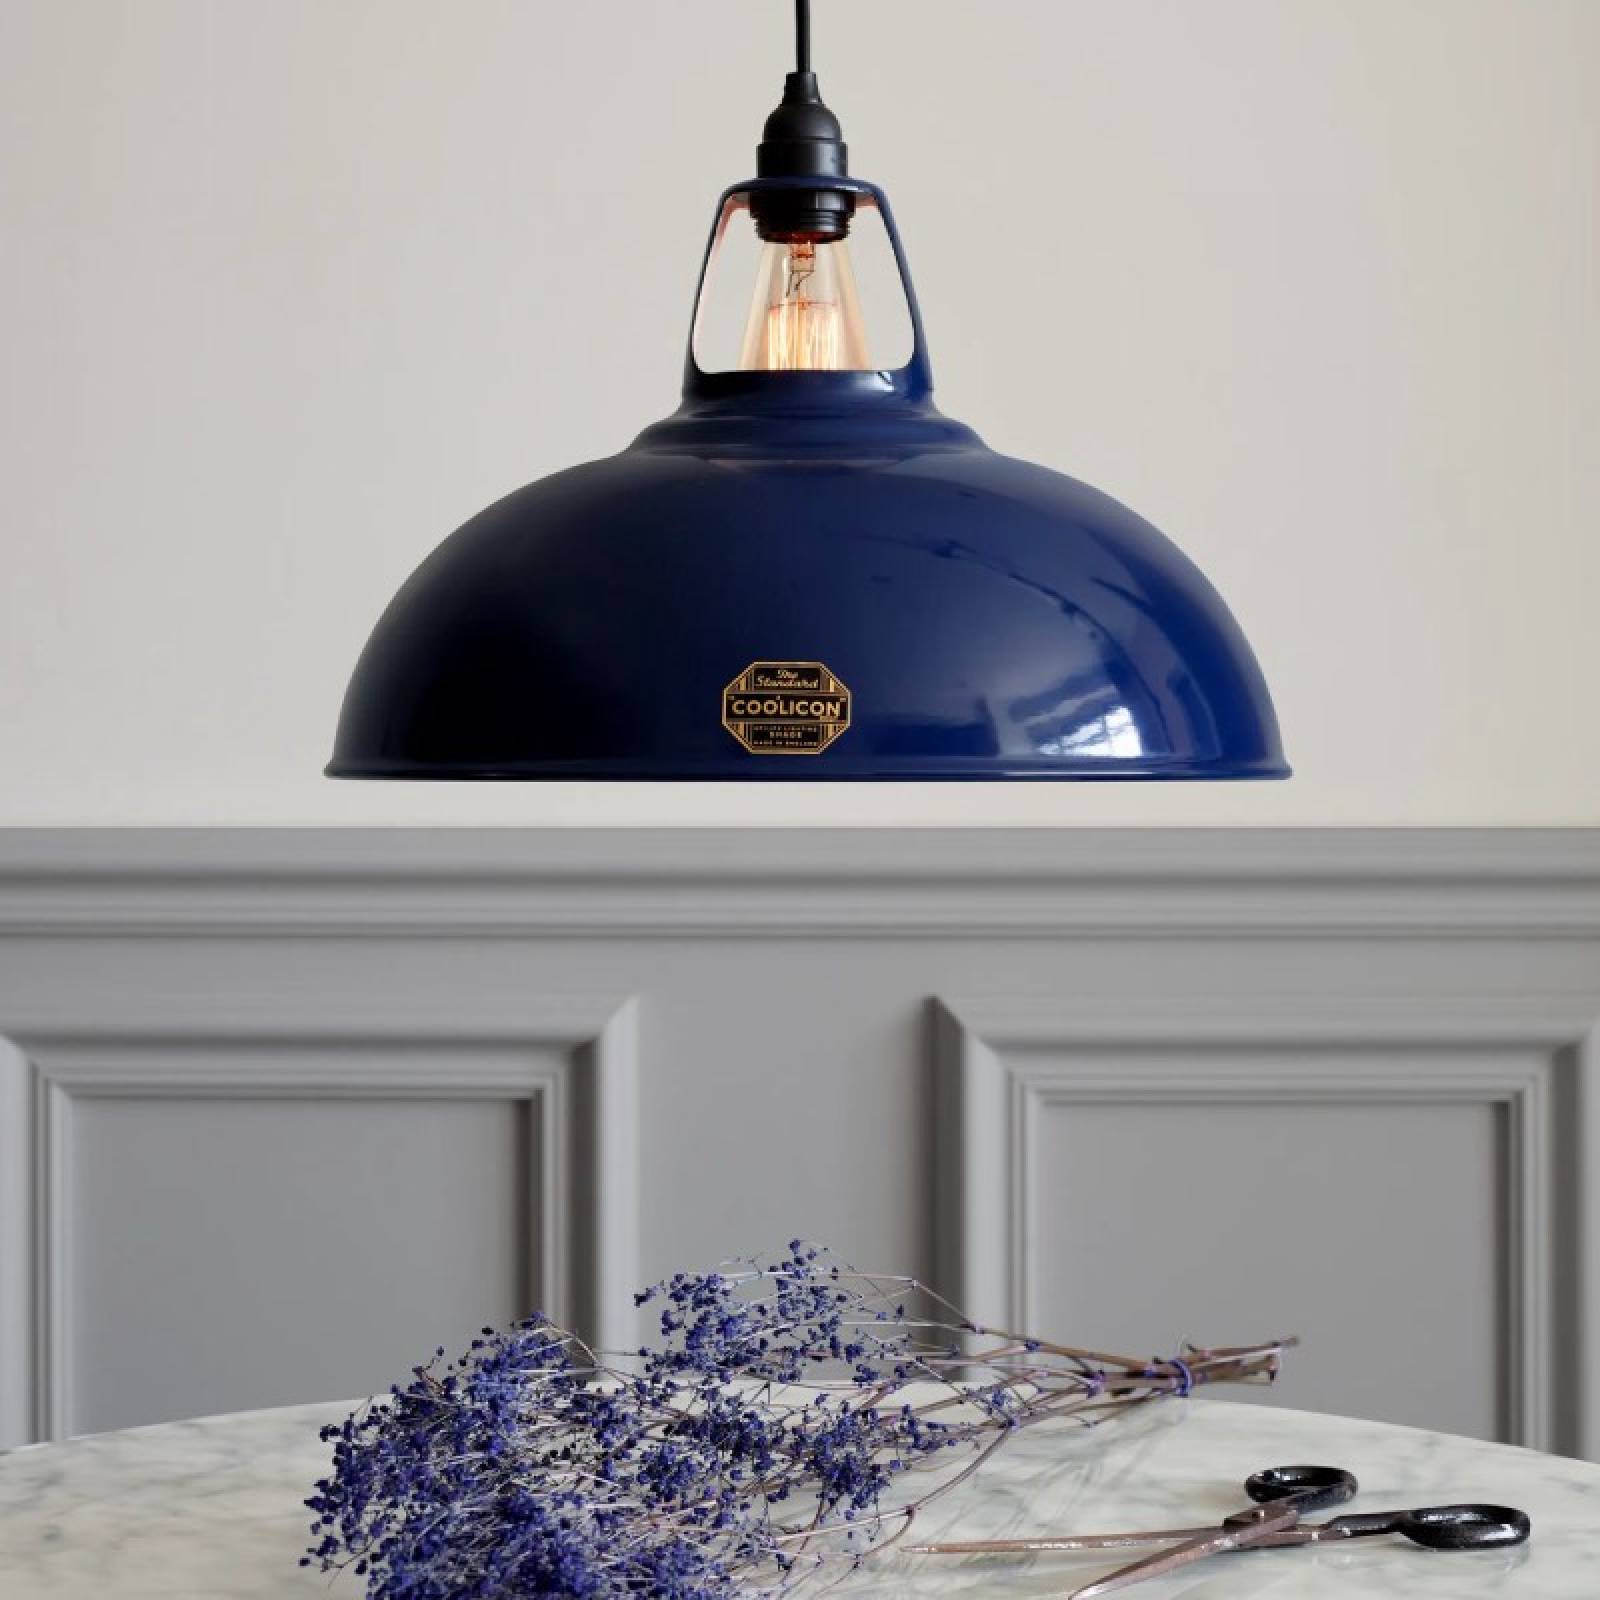 Classic Large Enamel Shade In Royal Blue By Coolicon thumbnails